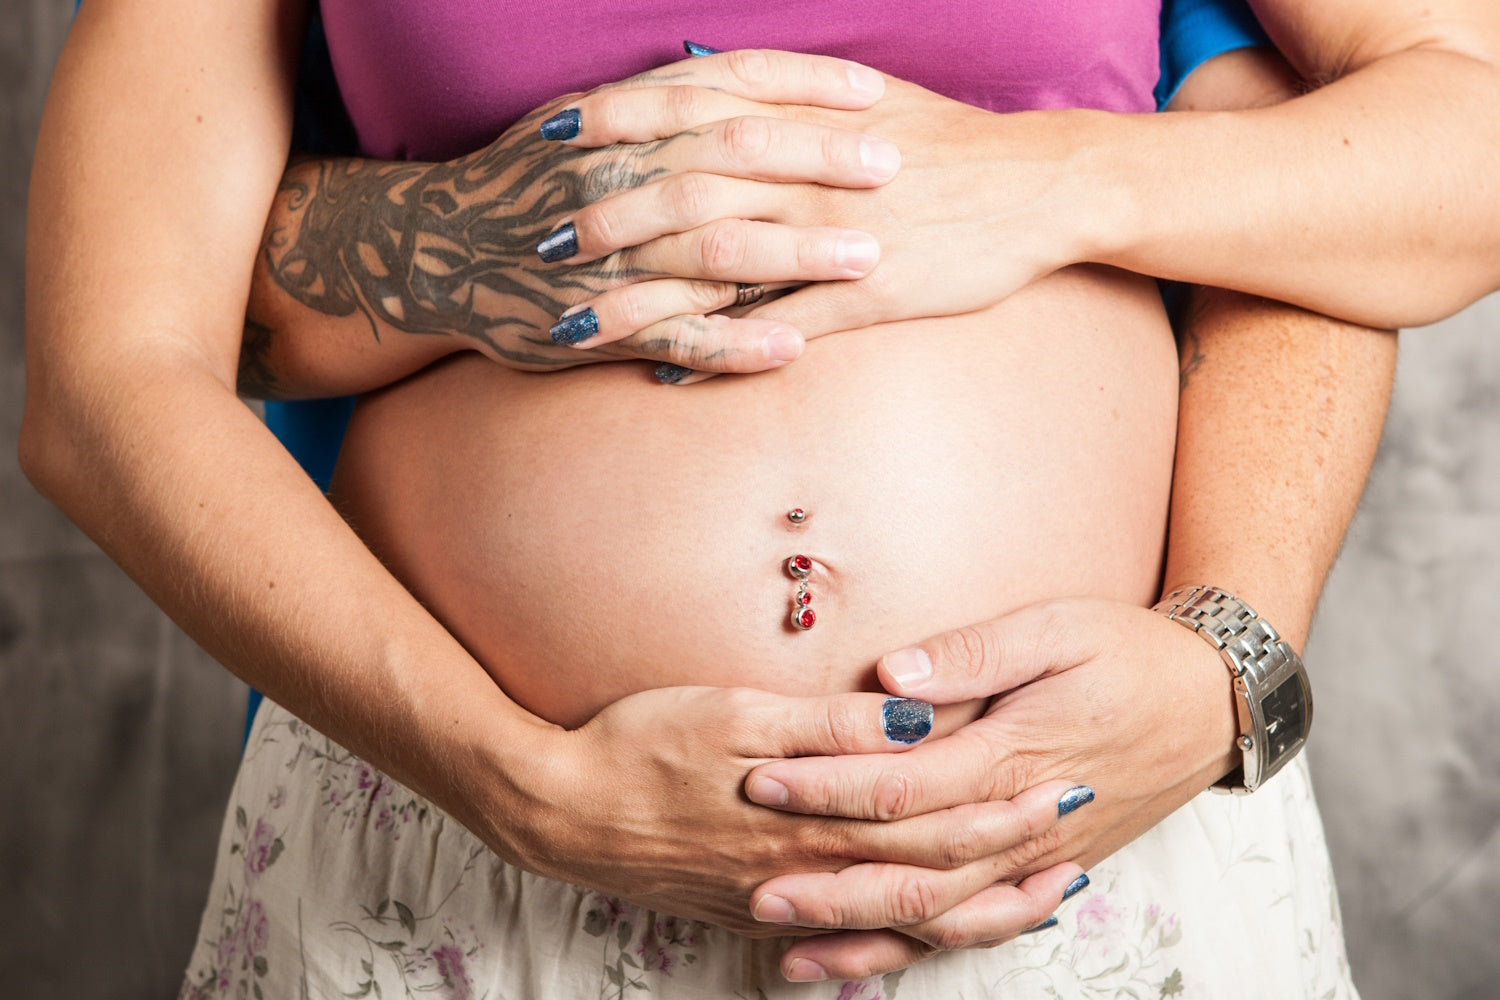 A pregnant woman with a belly button piercing with a persons arm around her.